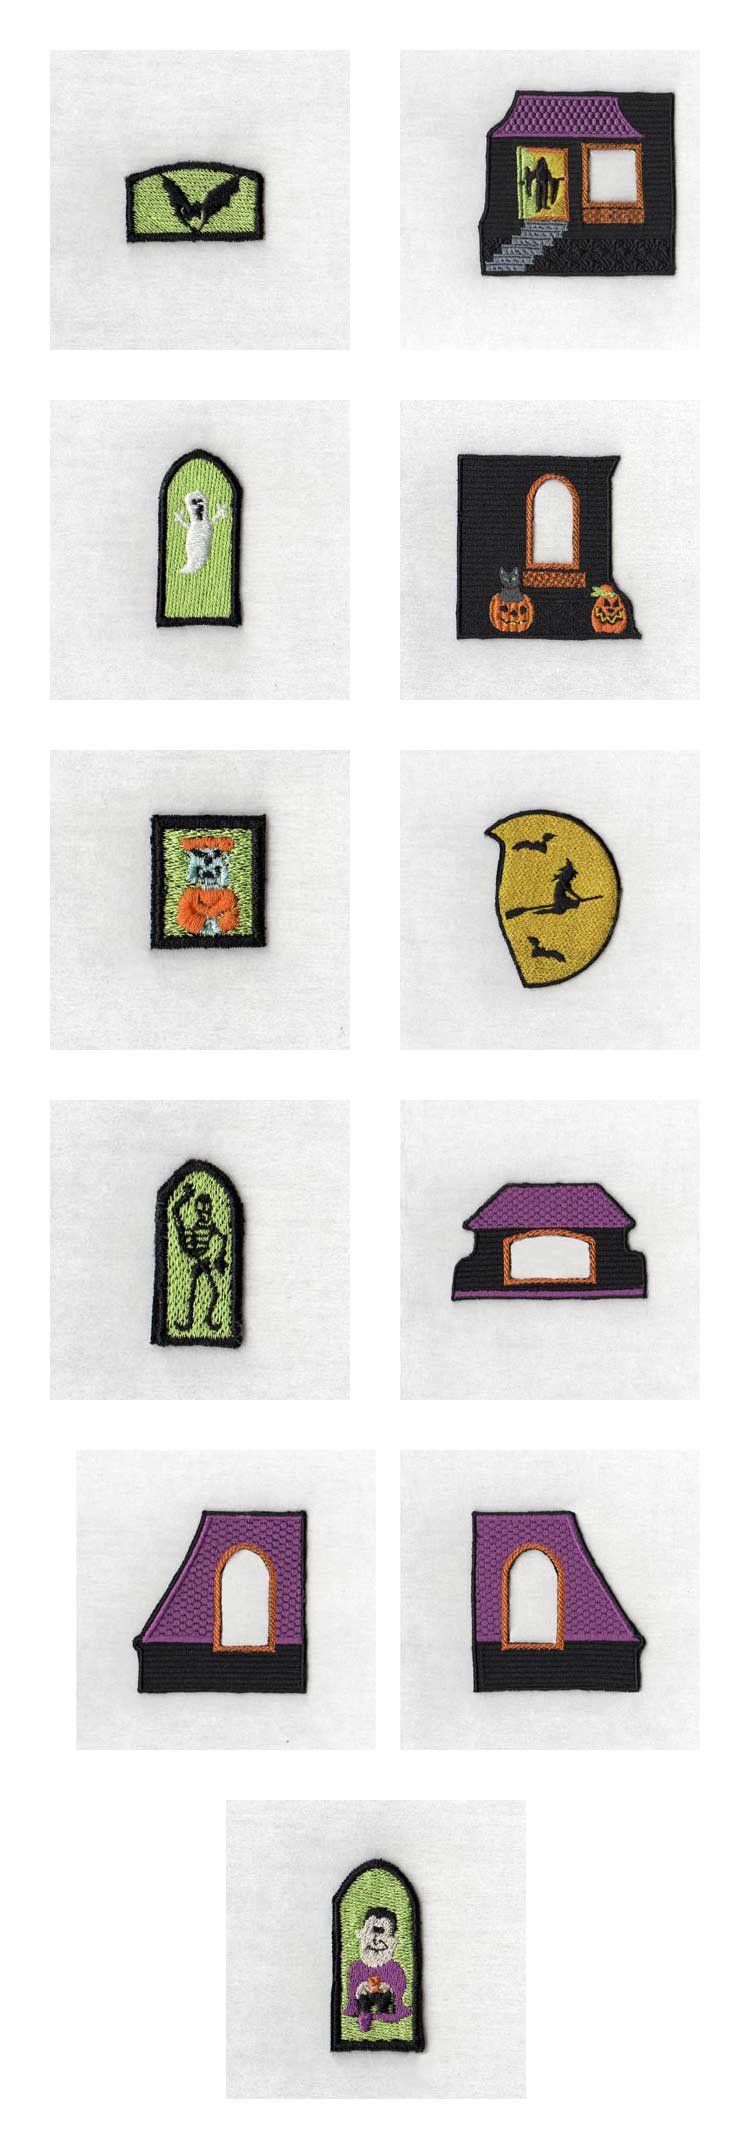 Haunted House Puzzle Embroidery Machine Design Details